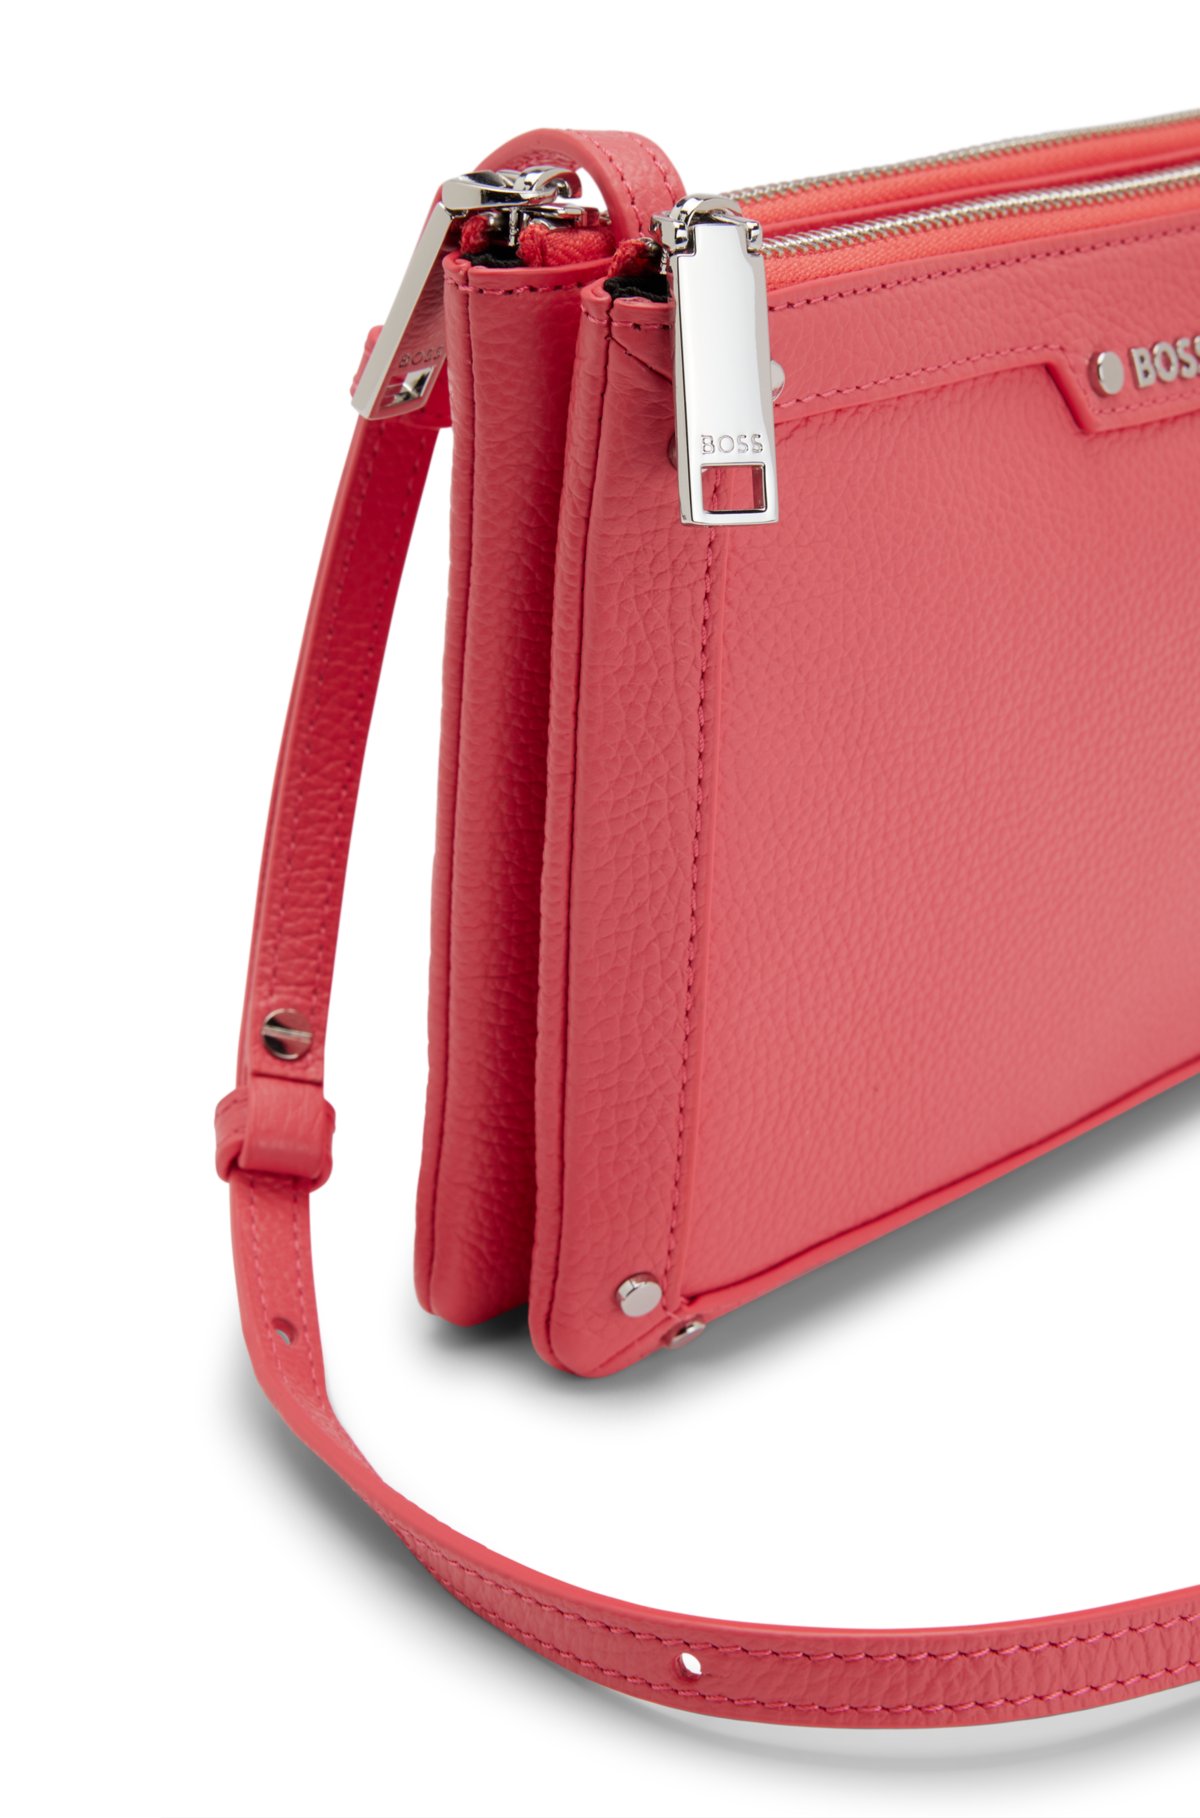 BOSS - Grained-leather bag with lettering crossbody logo